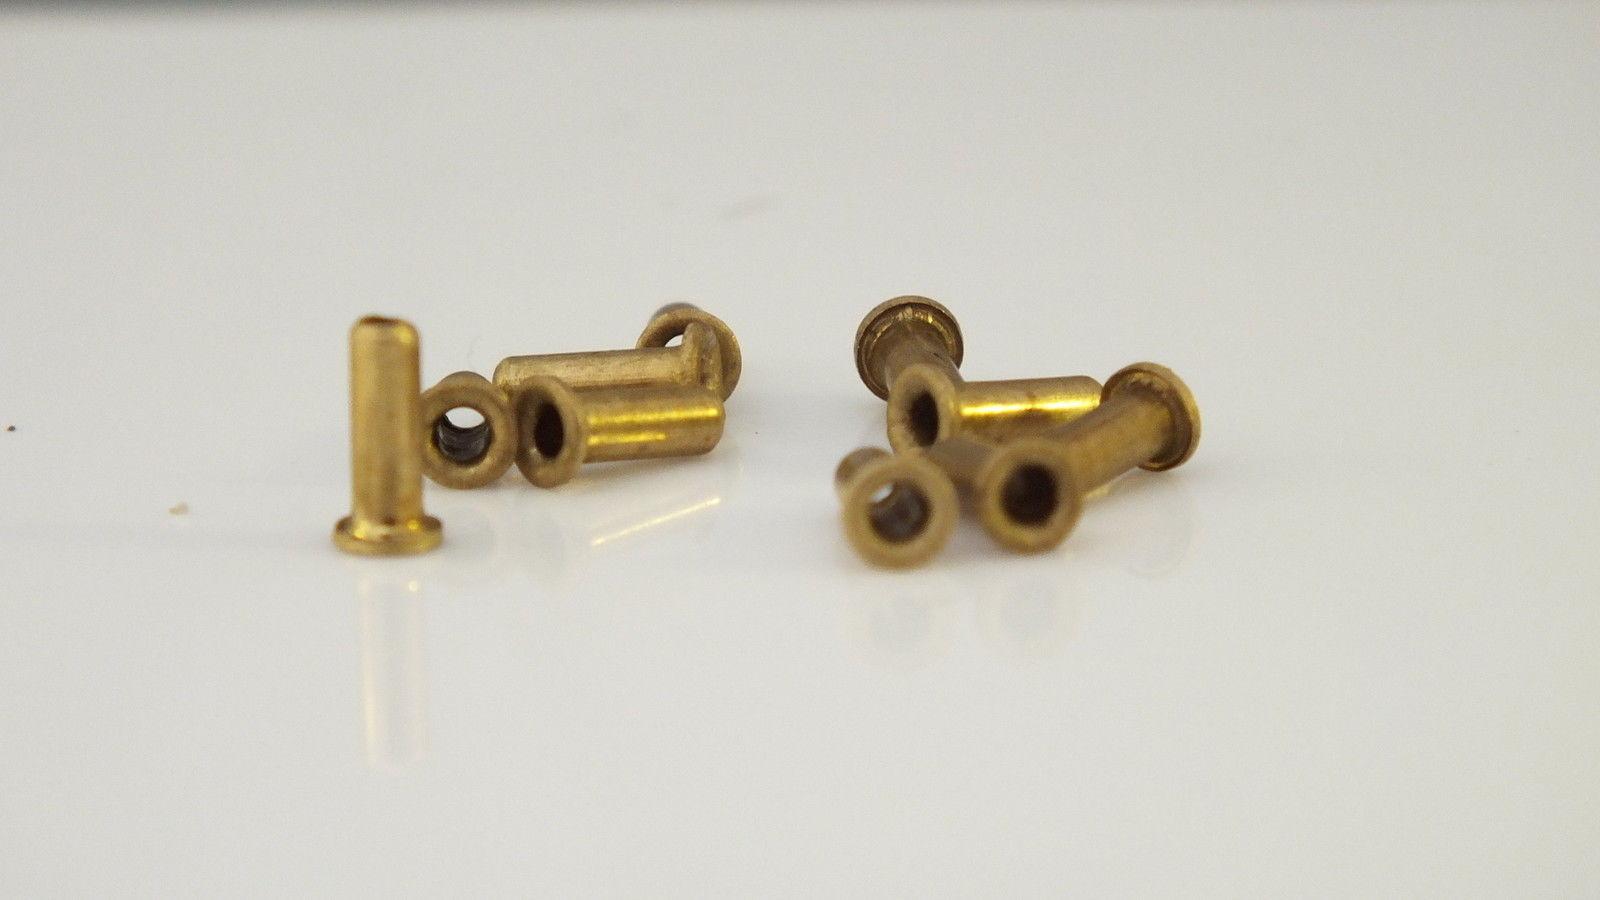 TRIANG/HORNBY X8025 ORIGINAL METAL SCREW-ON COUPLINGS.W/BRASS RIVETS EXCELLENT 